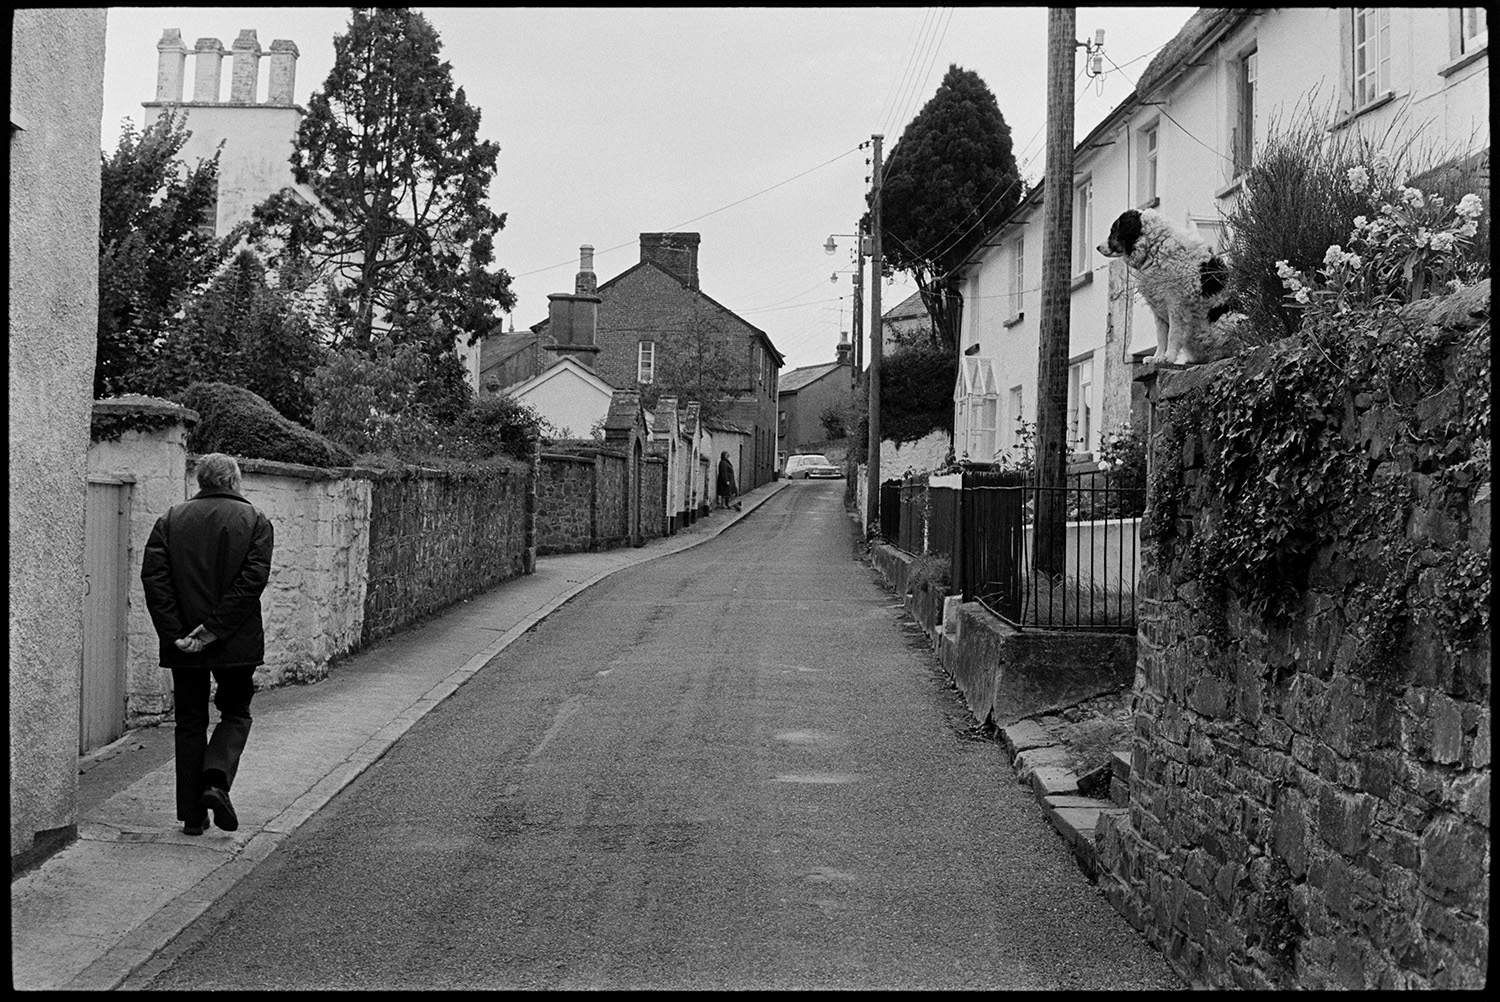 Street scene with dog. 
[A dog sat on a wall by a street in Hatherleigh watching people walk past.  Houses, railings are gardens can be seen further along the street.]